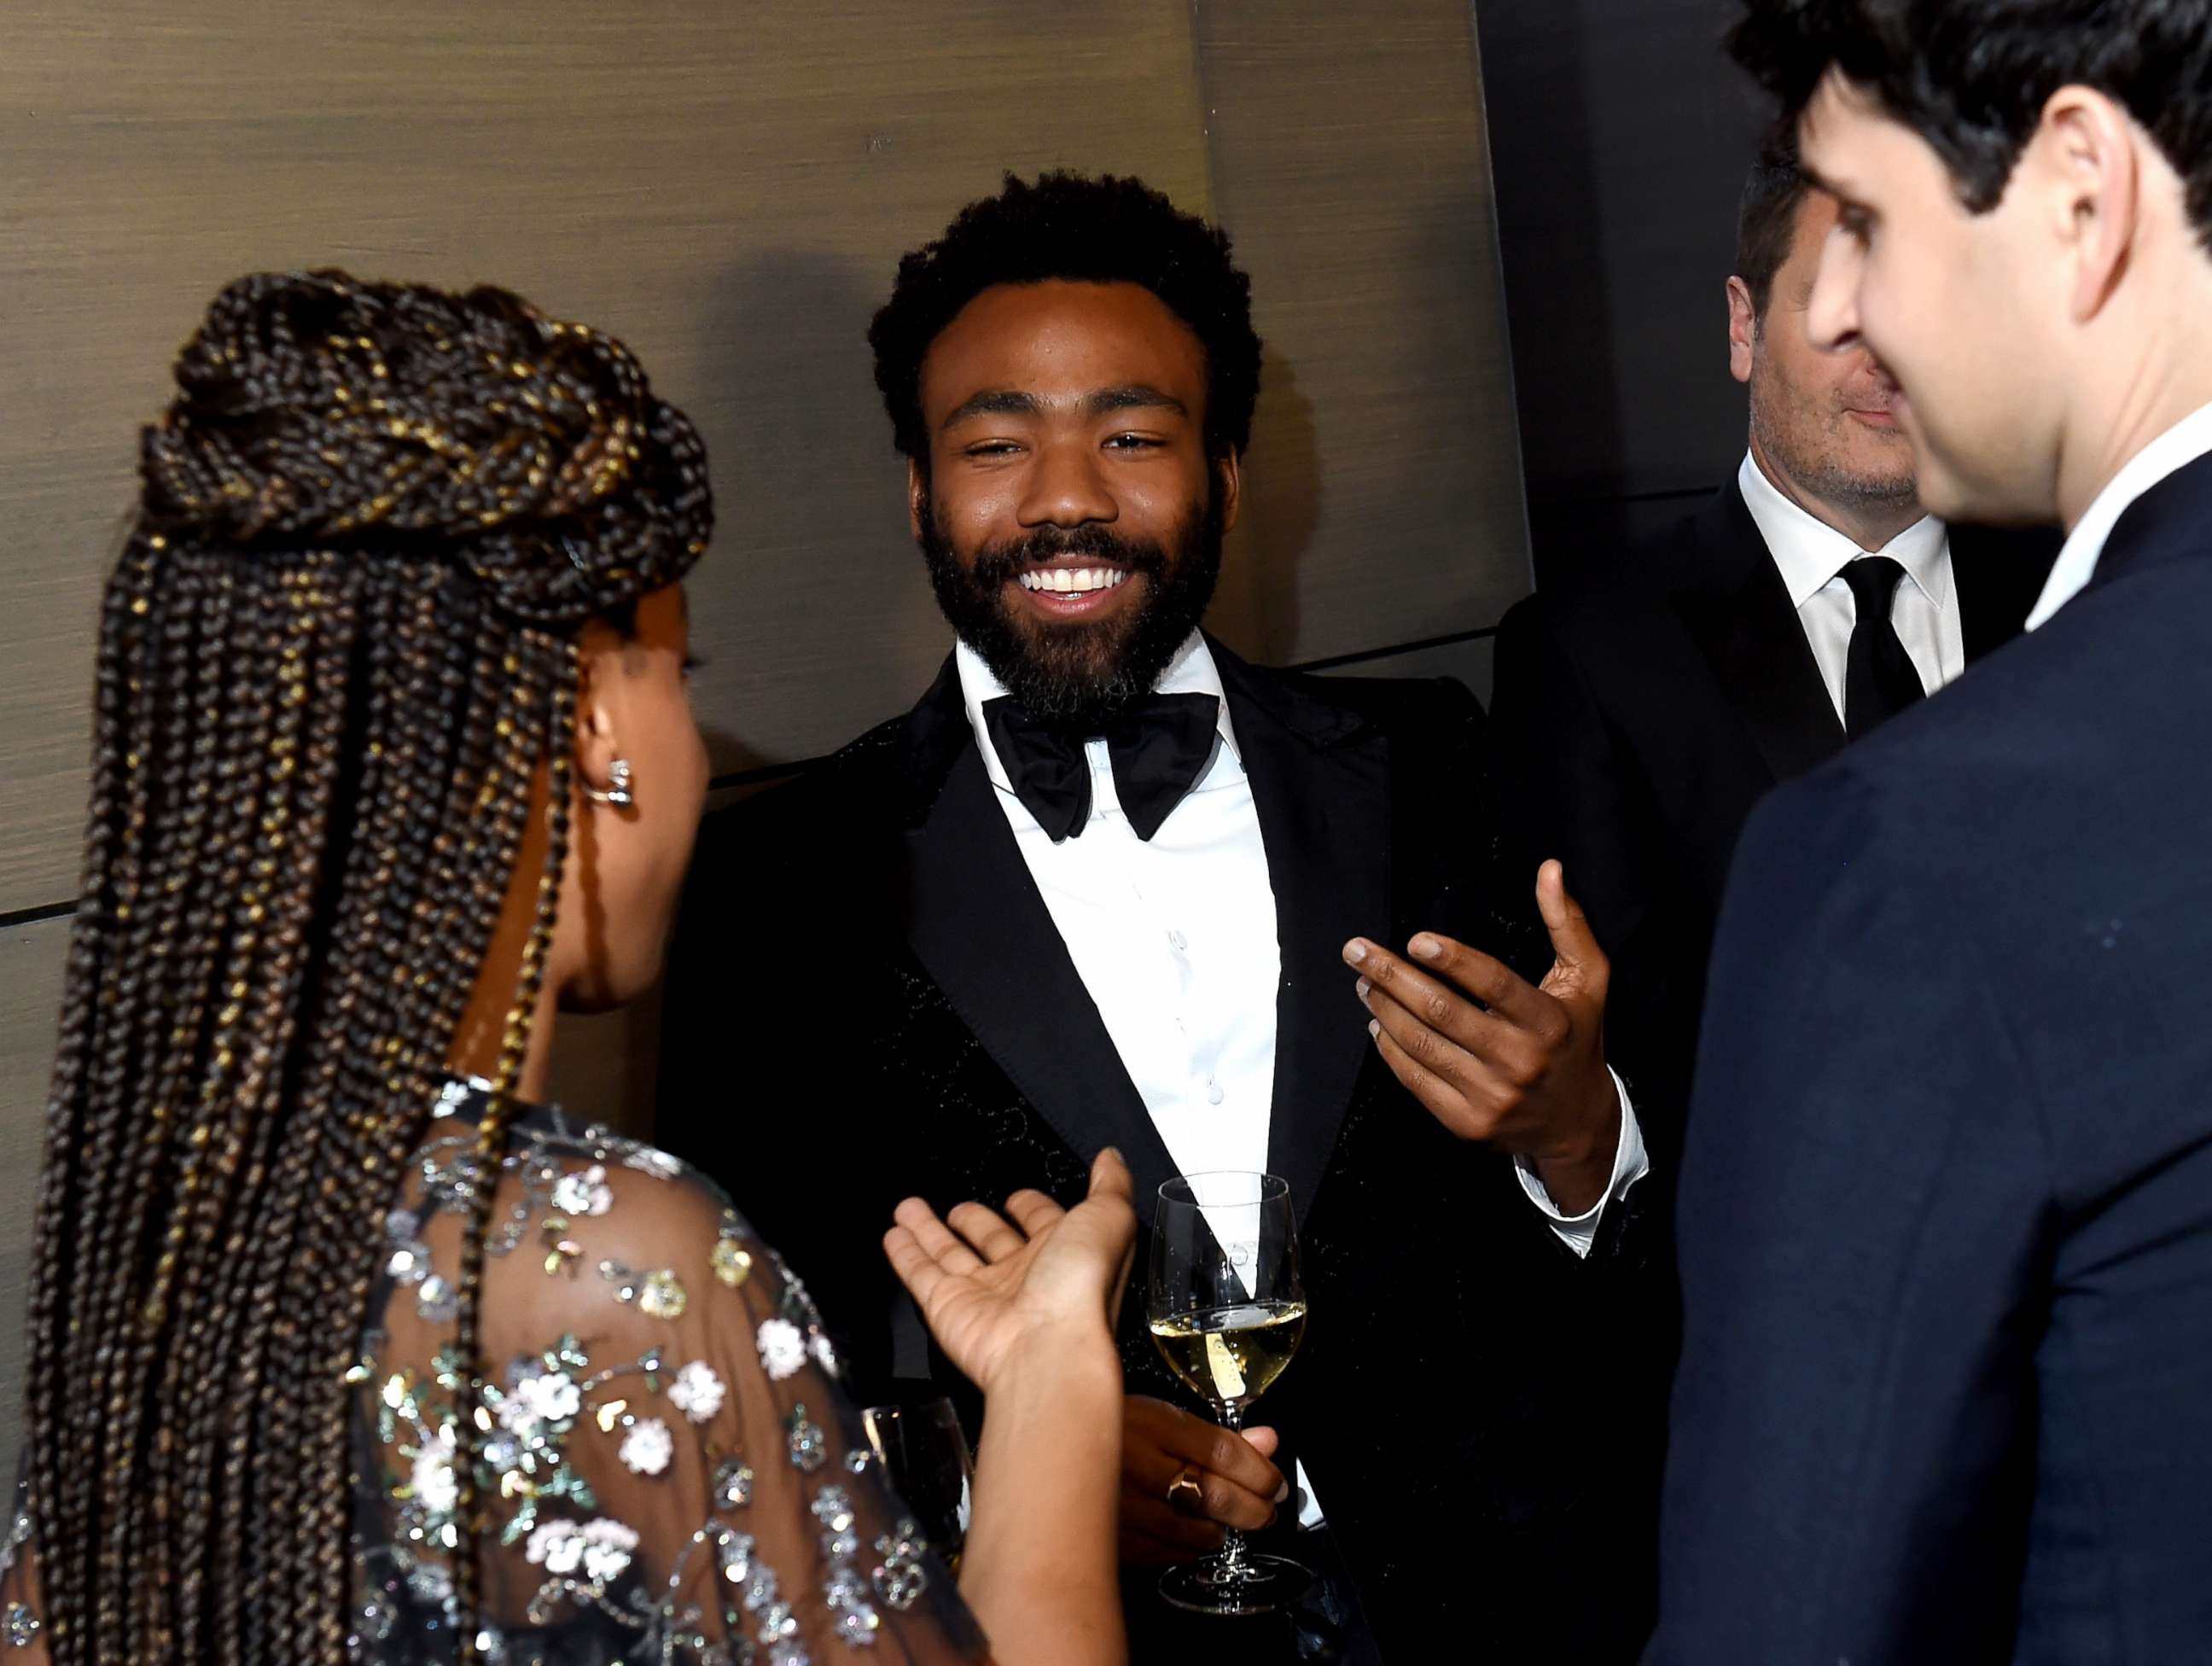 PHOTO: Donald Glover attends the 2018 Vanity Fair Oscar Party hosted by Radhika Jones at Wallis Annenberg Center for the Performing Arts, March 4, 2018, in Beverly Hills, Calif.